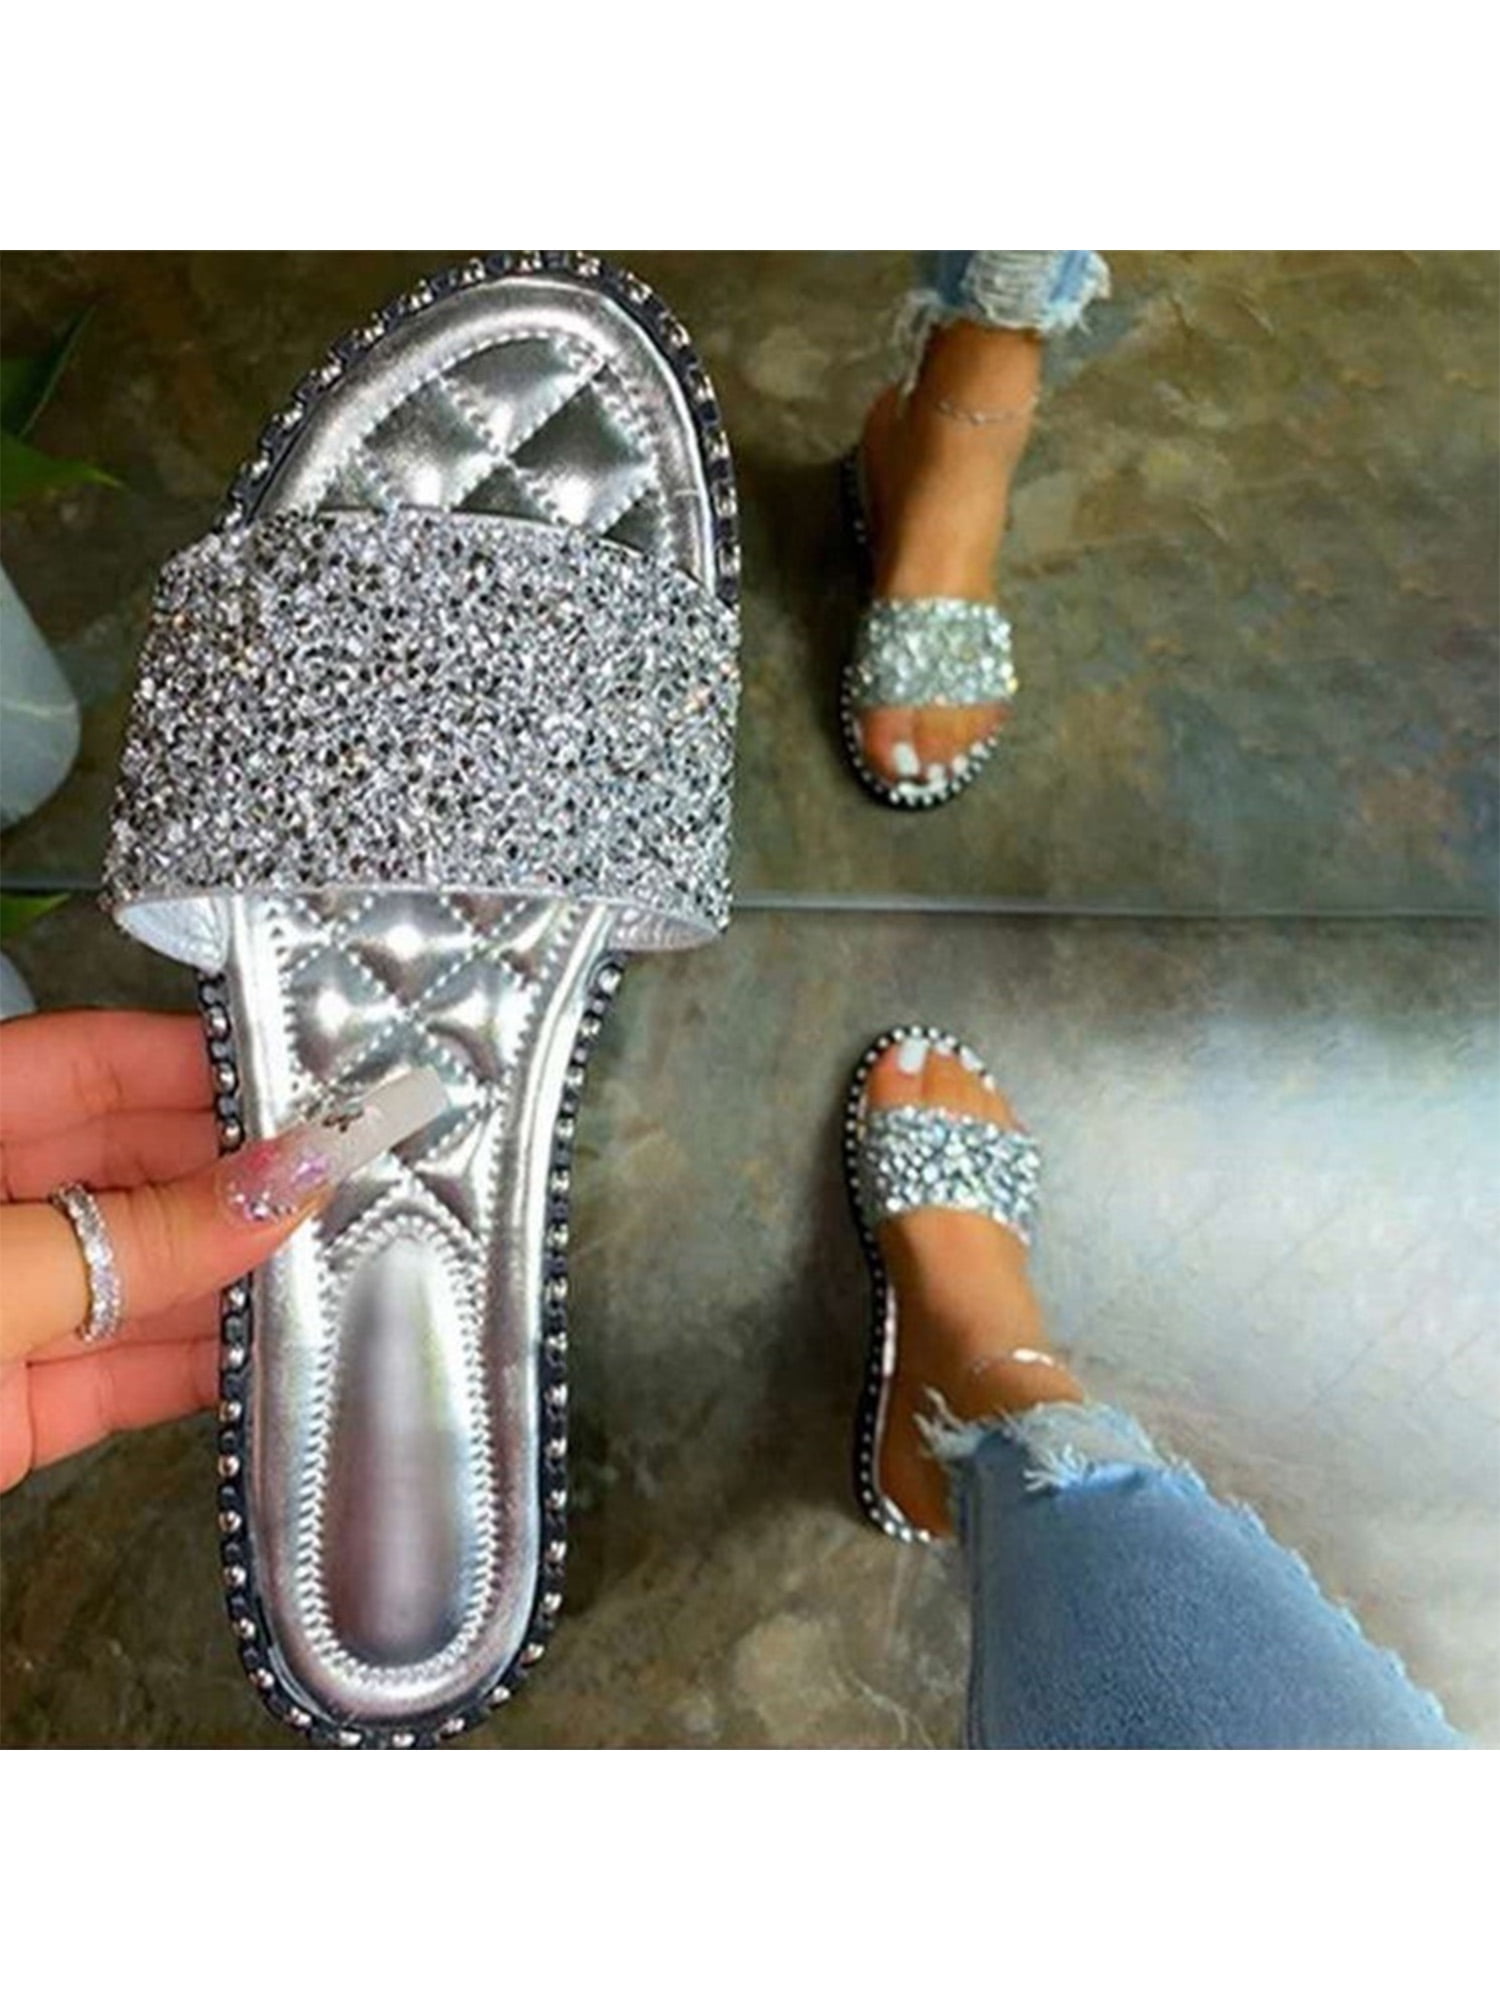 Womens Flat Slides Sandals Diamante Sparkly Sliders Colorful Diamond Slippers Platform Shoes,Silver,6